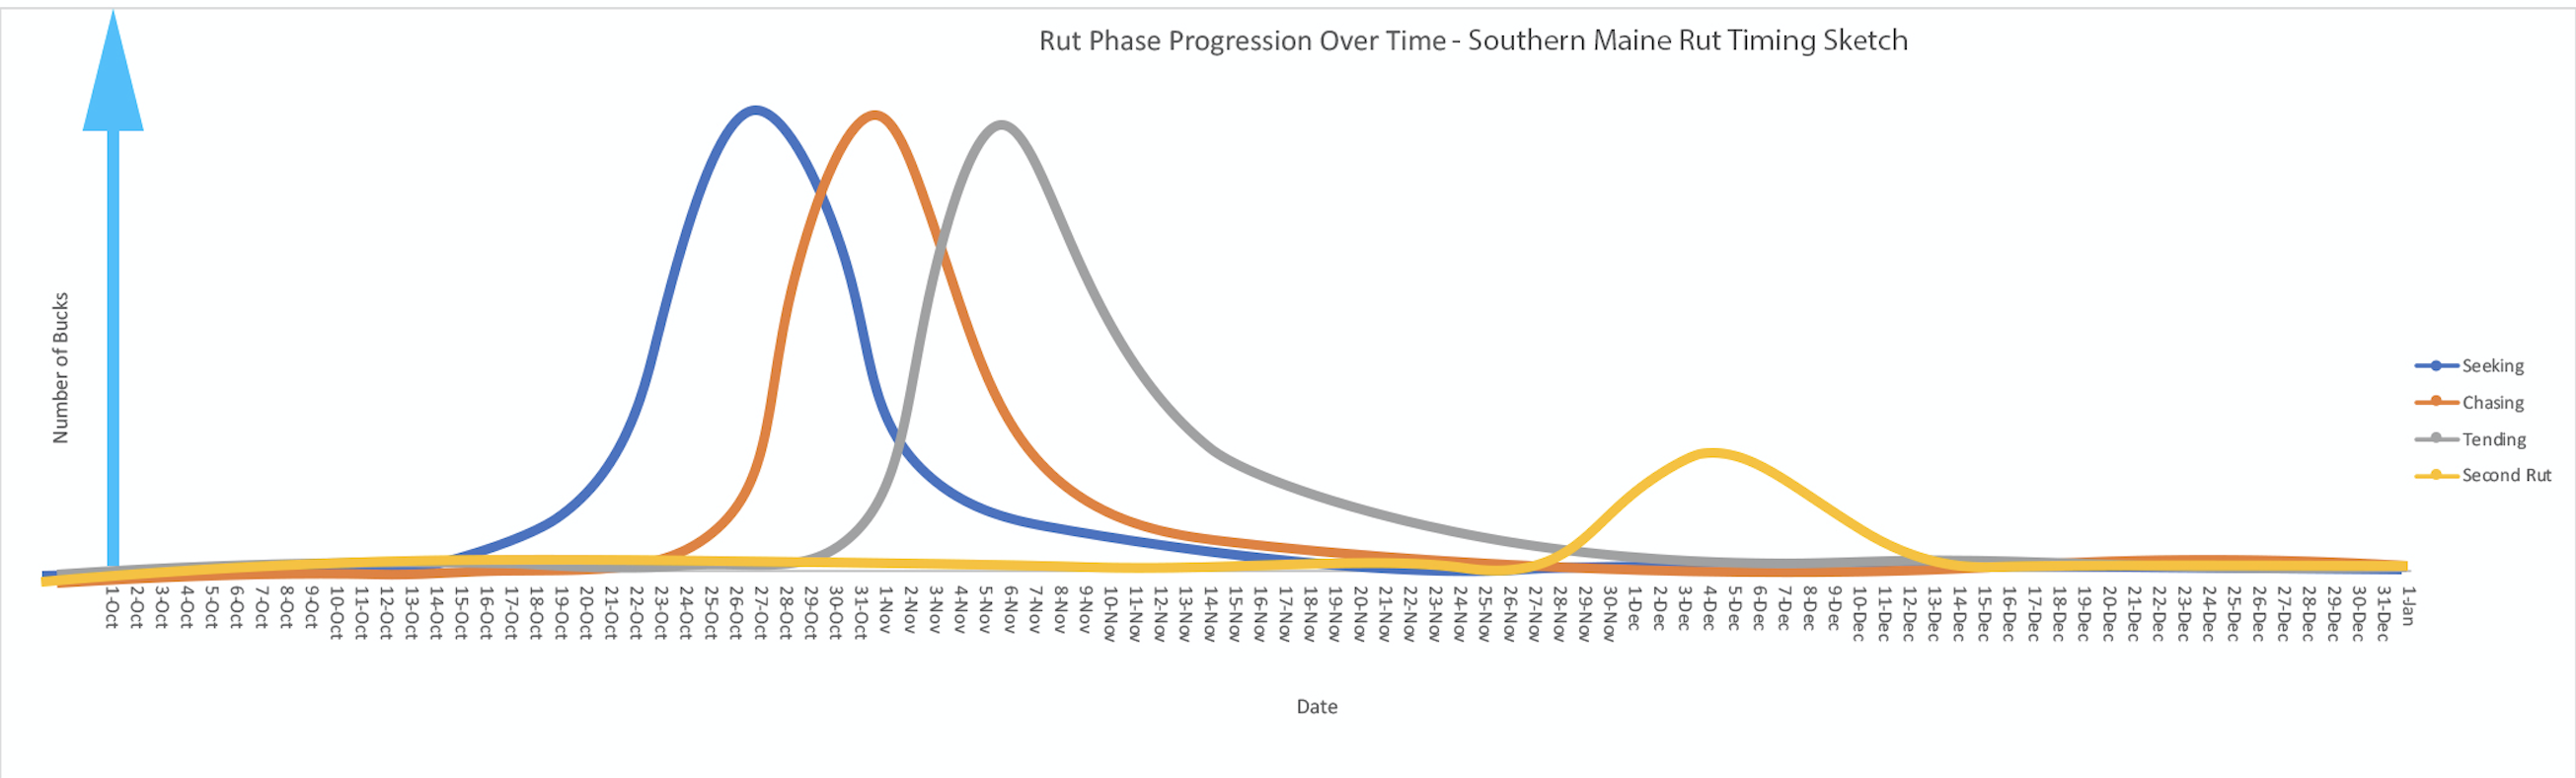 Southern-Maine-Rut-Phase-Graph